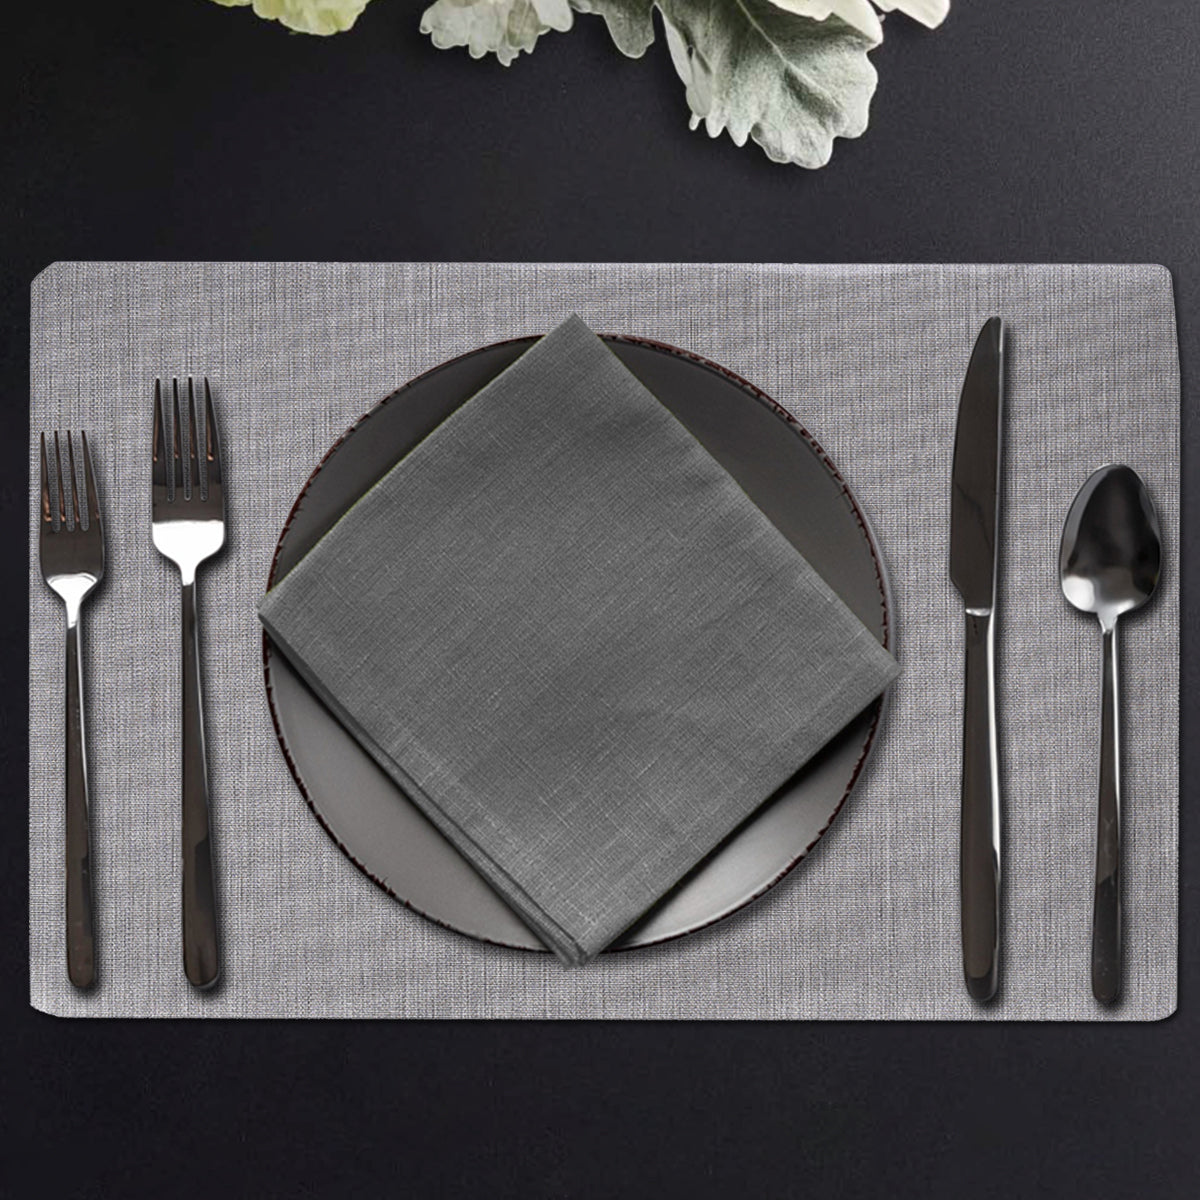 Woven PVC Placemats - Set of 4 and 8